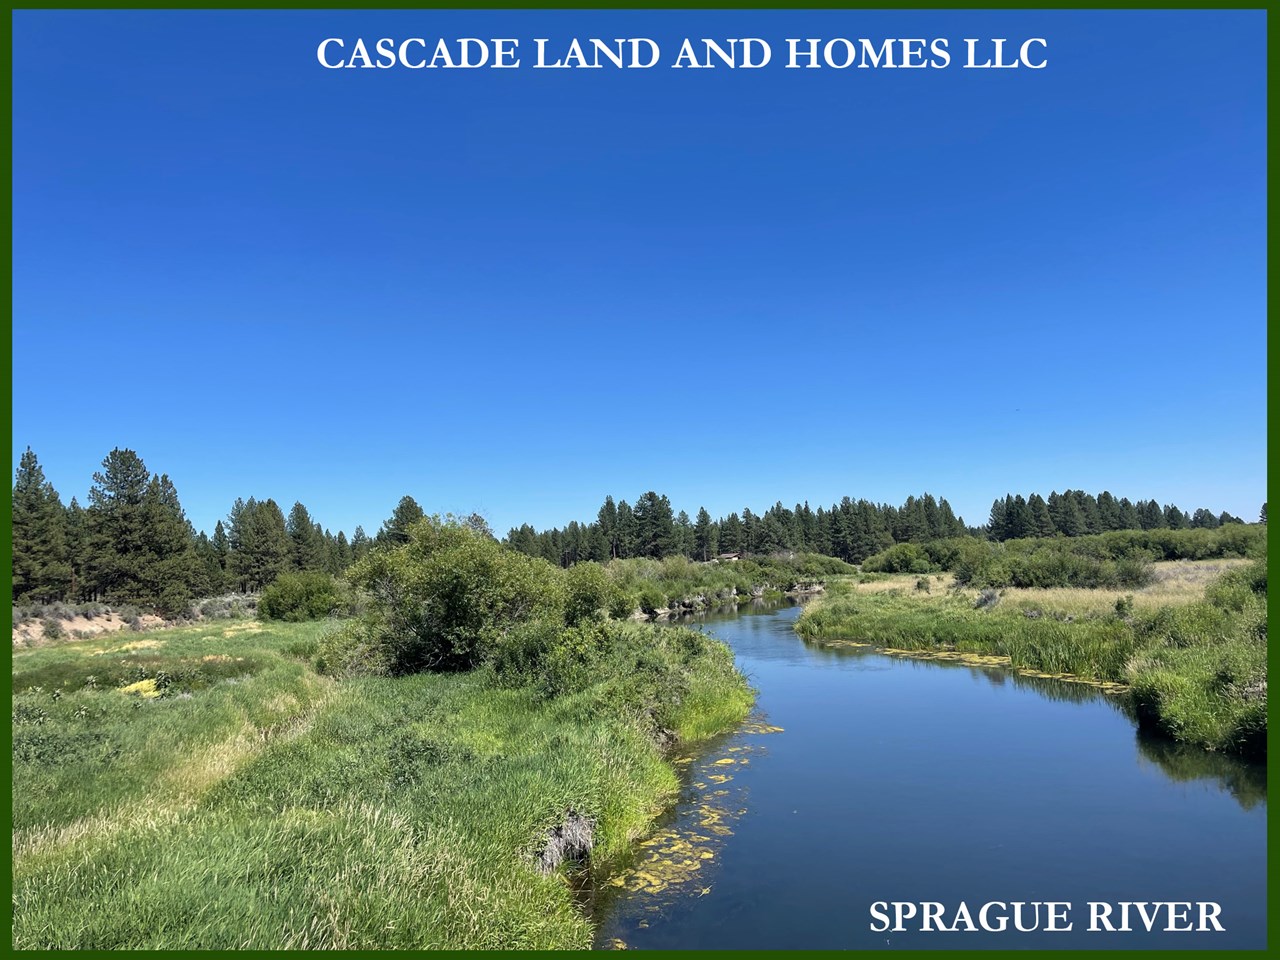 the majestic sprague river is only about a mile from the property and offers excelling fishing! it flows year-round and keeps the valley floor lush and green. there are pastures and farmlands, mostly small family farms.